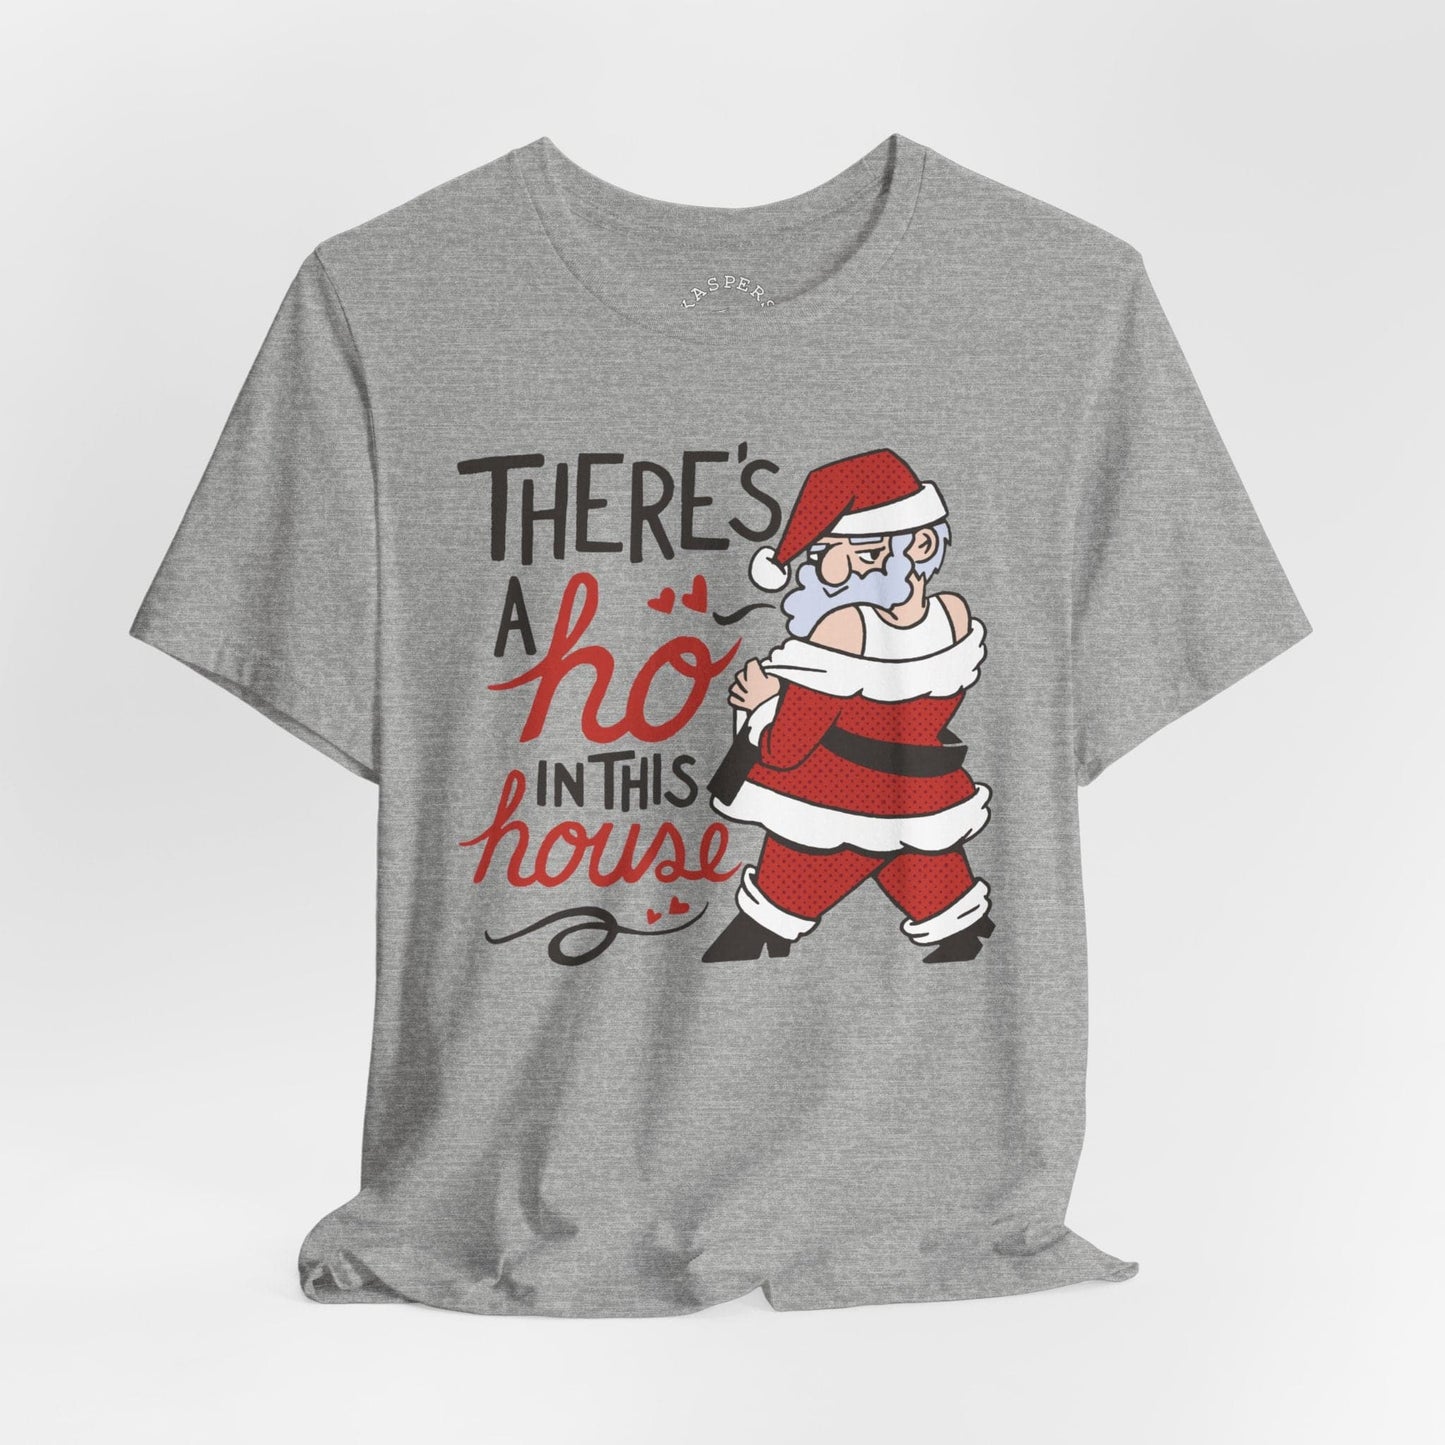 There's A Ho In This House T-Shirt